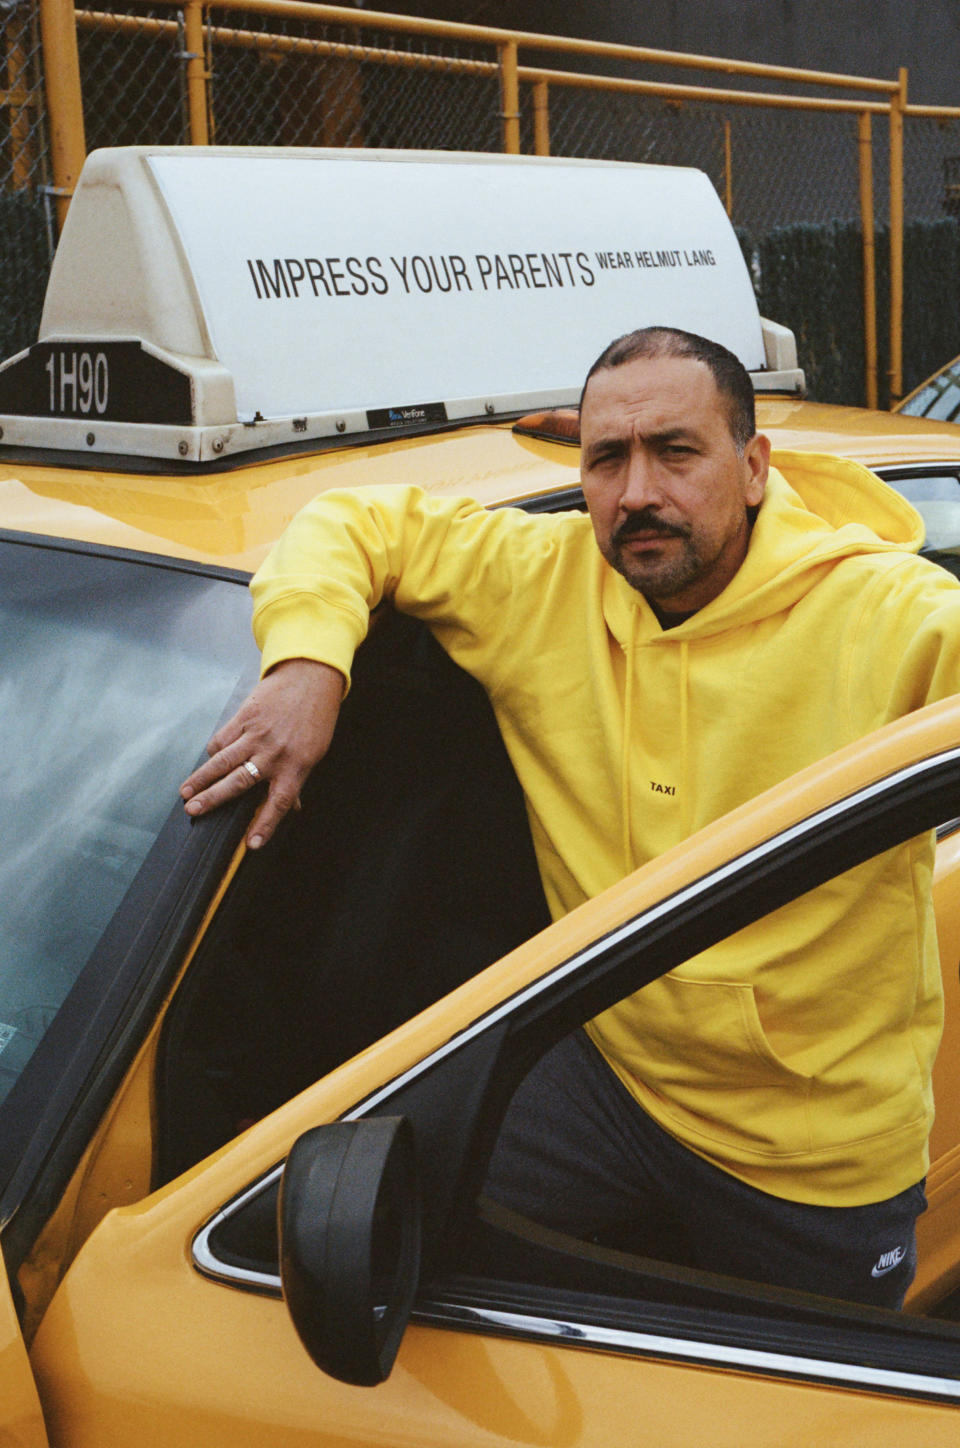 The Helmut Lang Taxi Project